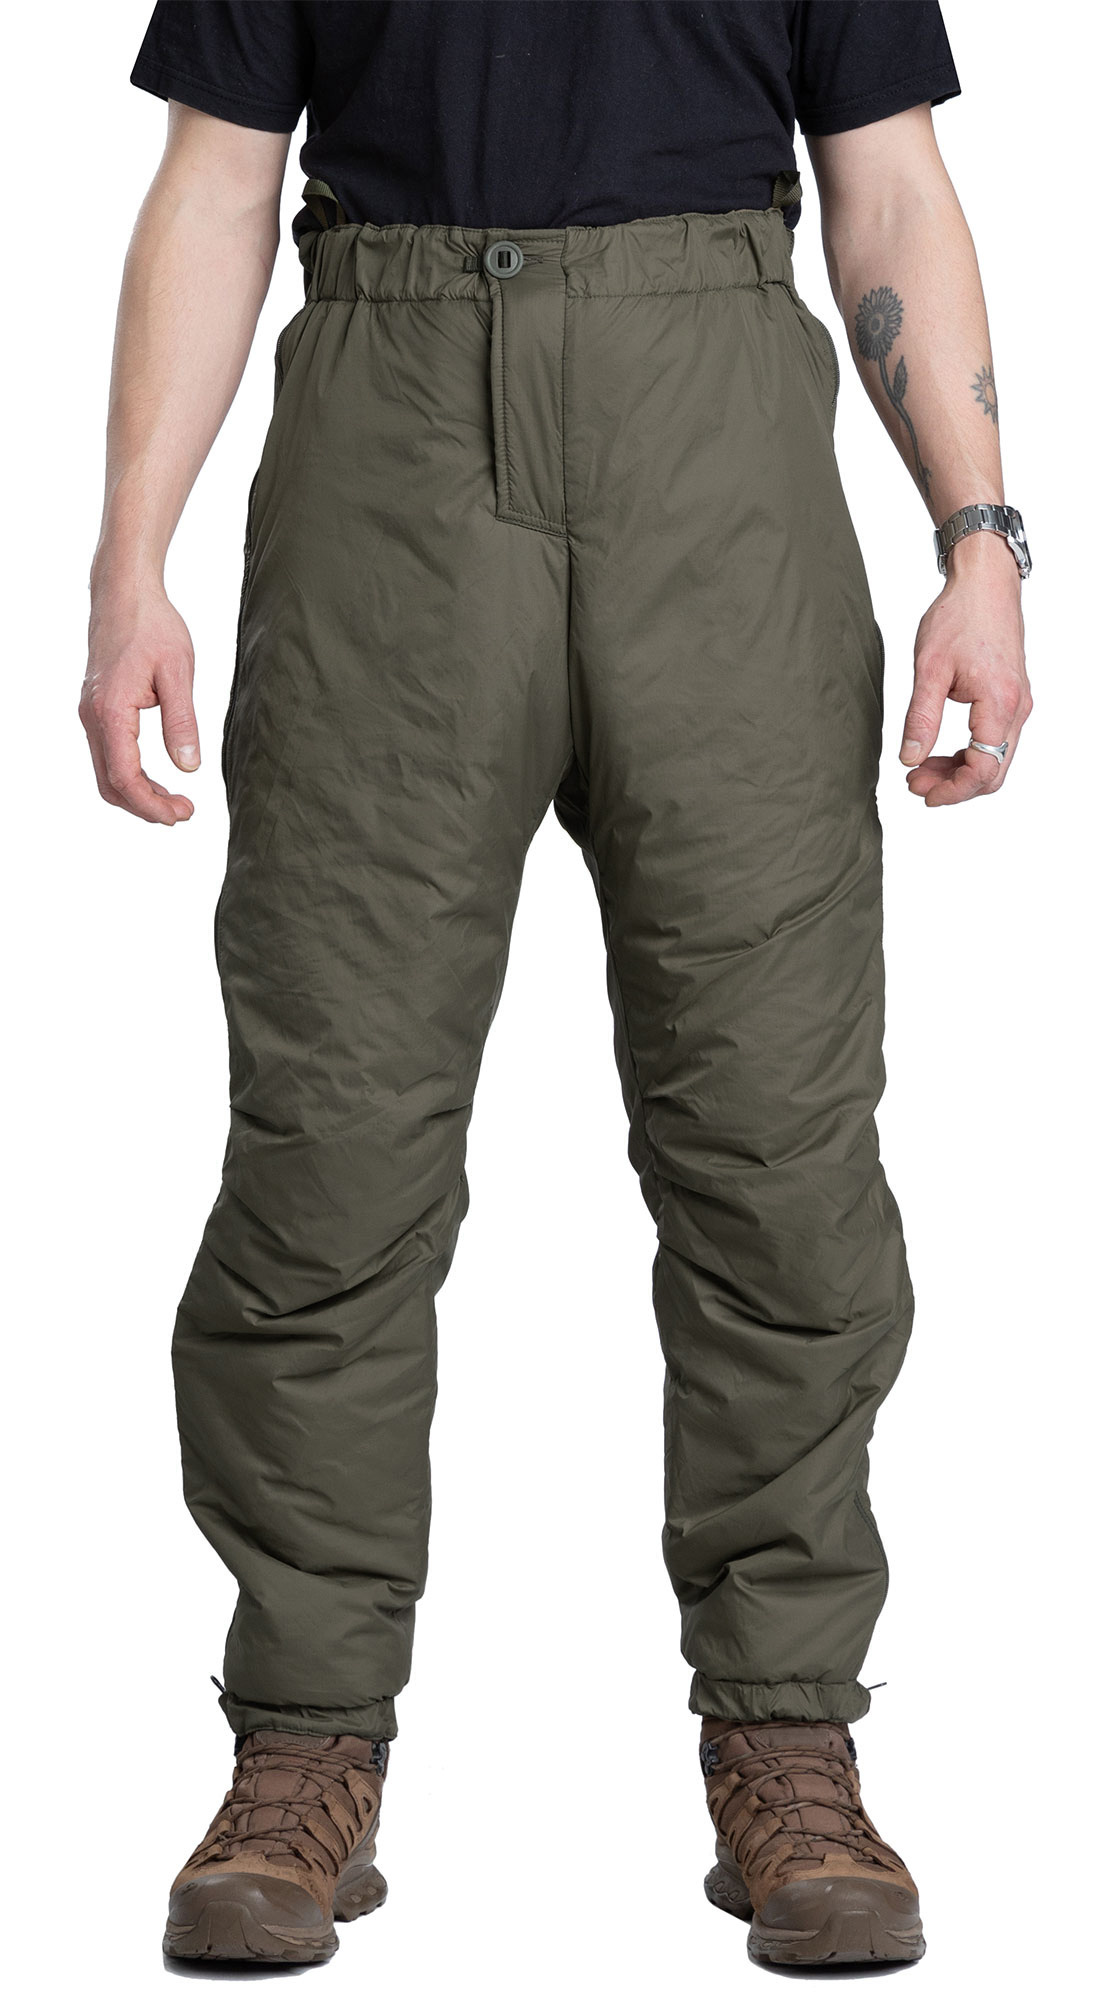 British Military Thermal Trousers (Softie)